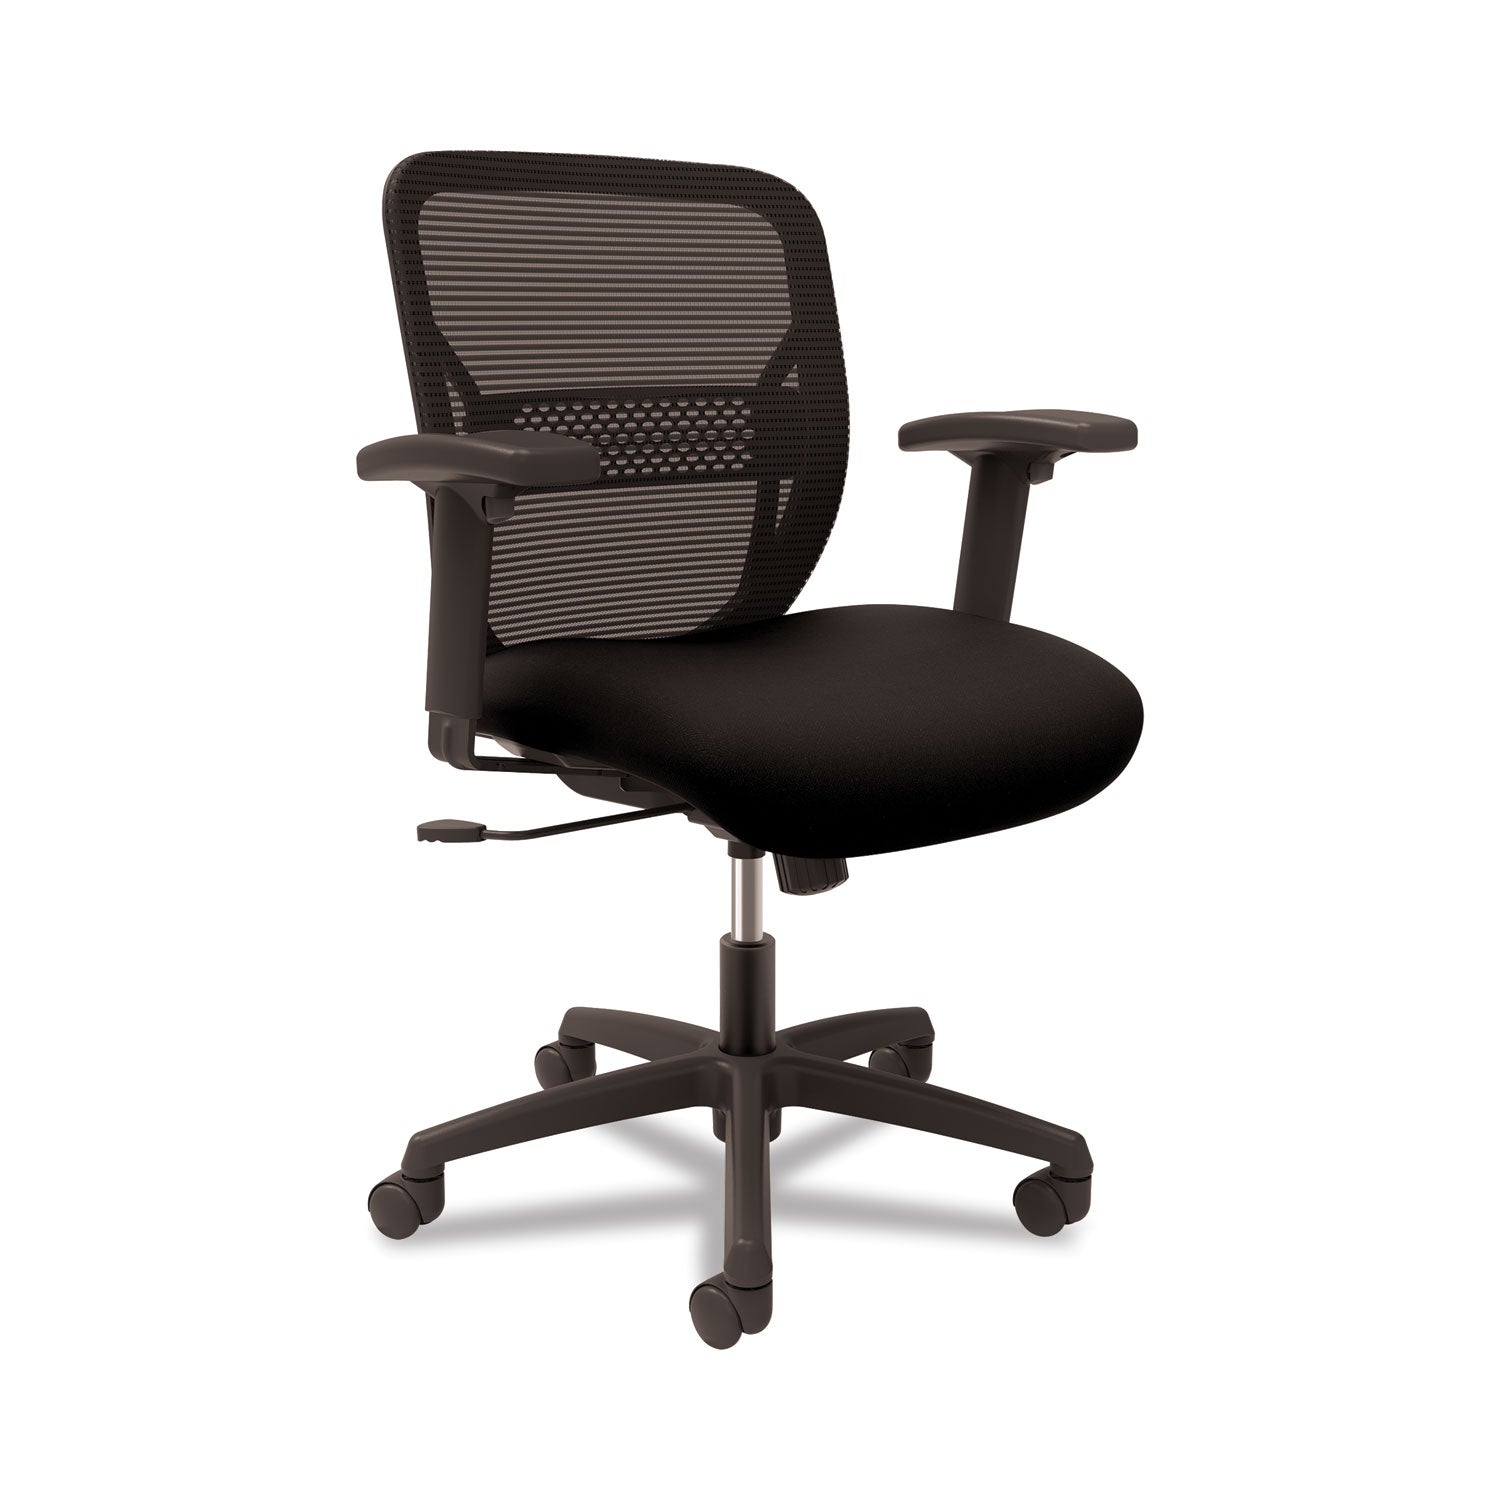 gateway-mid-back-task-chair-supports-up-to-250-lb-17-to-22-seat-height-black_hongvfmz1accf10 - 2